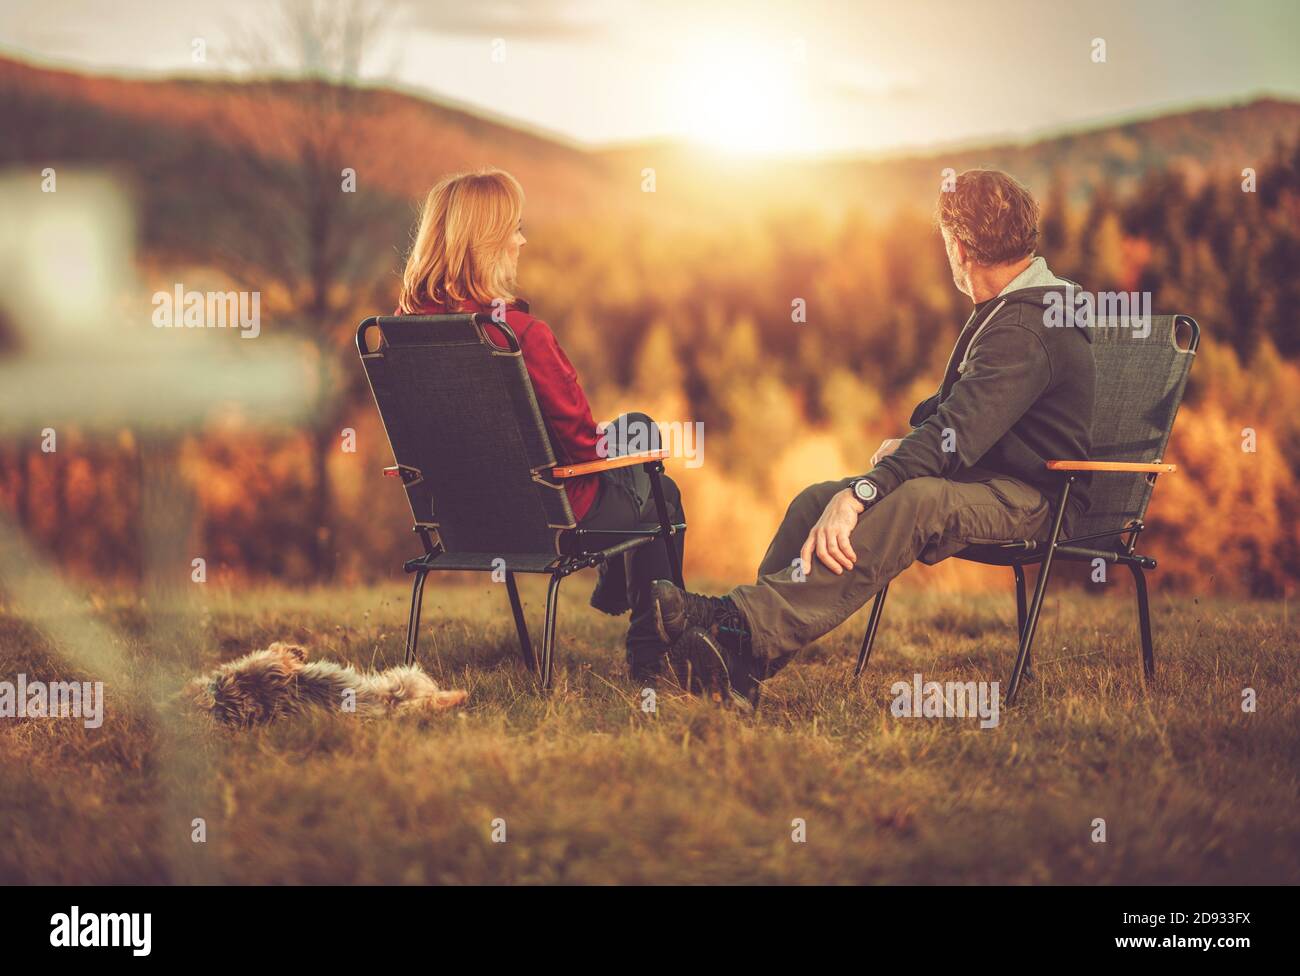 Caucasian Couple in Their 40s Seating in Front of Scenic Vista Enjoying Their Life and the Nature. Australian Silky Terrier Next to Chairs. Colorful F Stock Photo